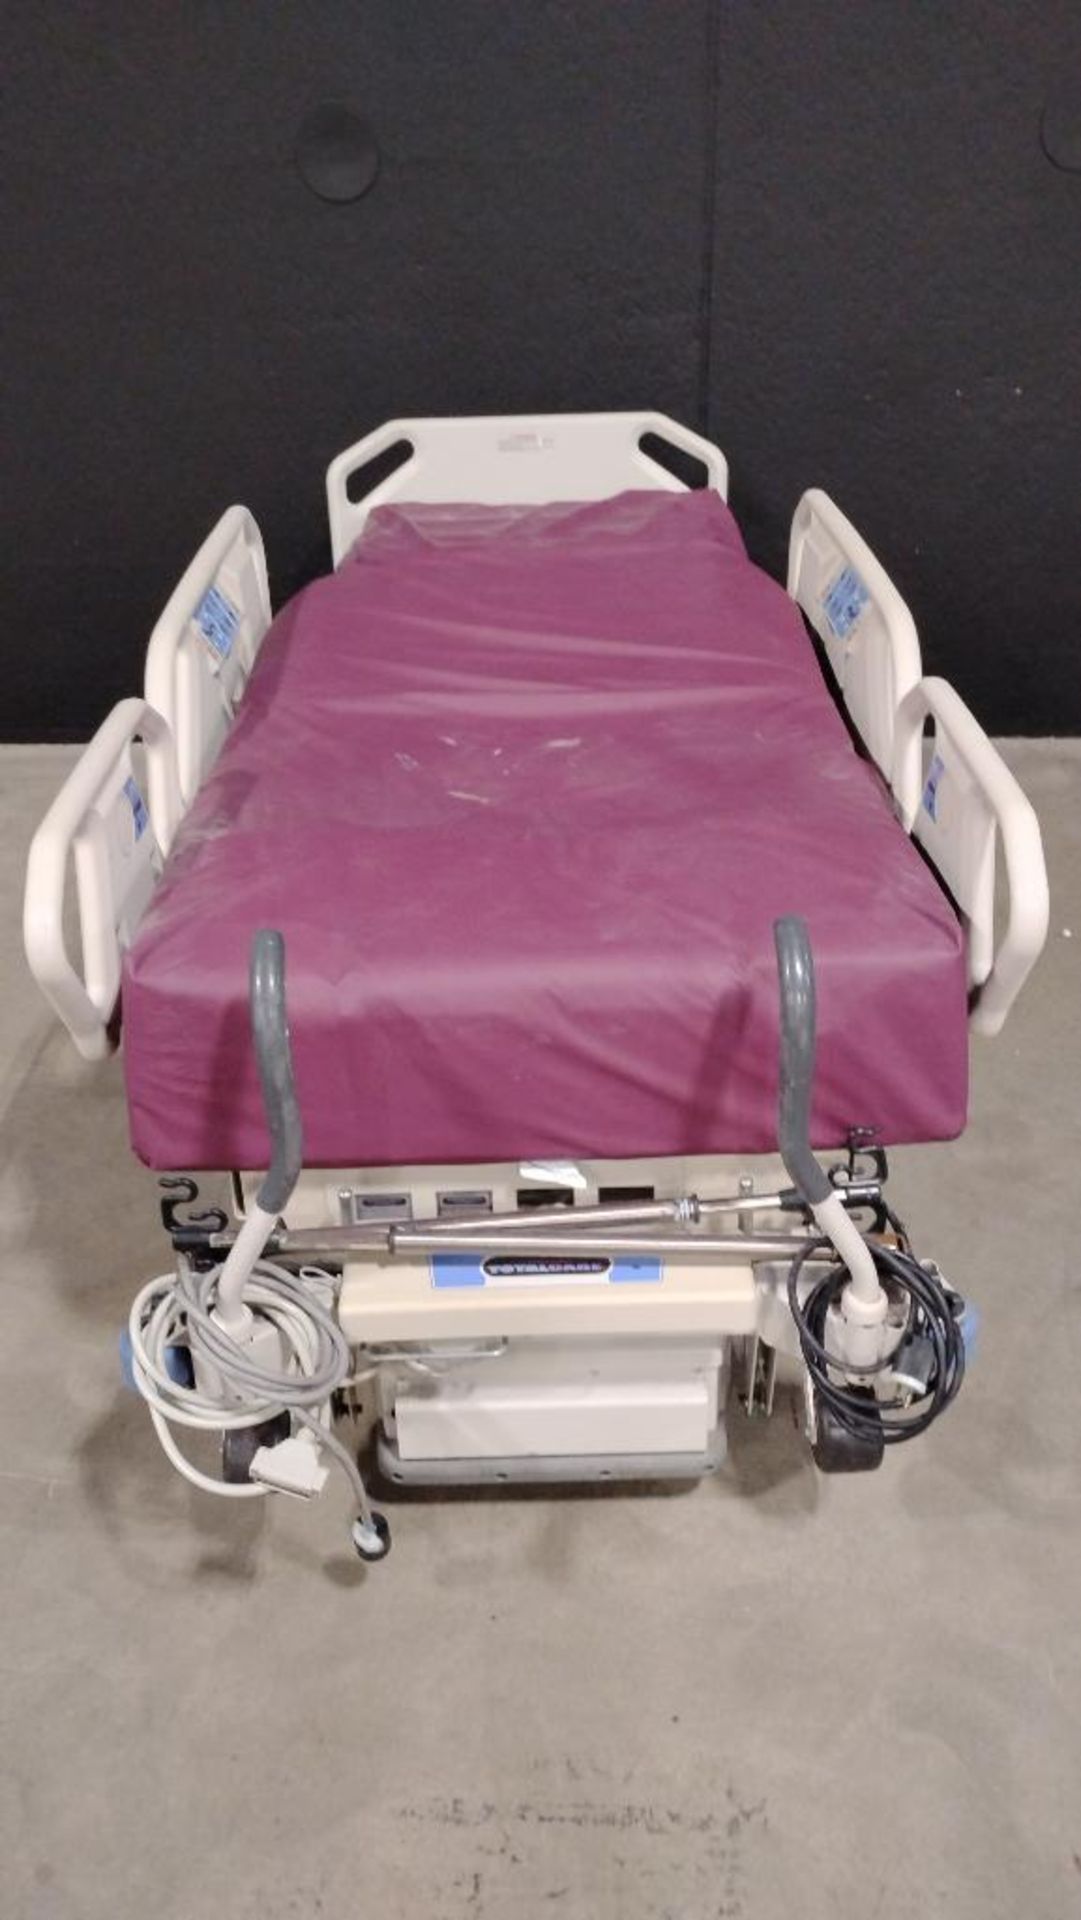 HILL-ROM TOTAL CARE SPORT 2 P1900 HOSPITAL BED - Image 4 of 4